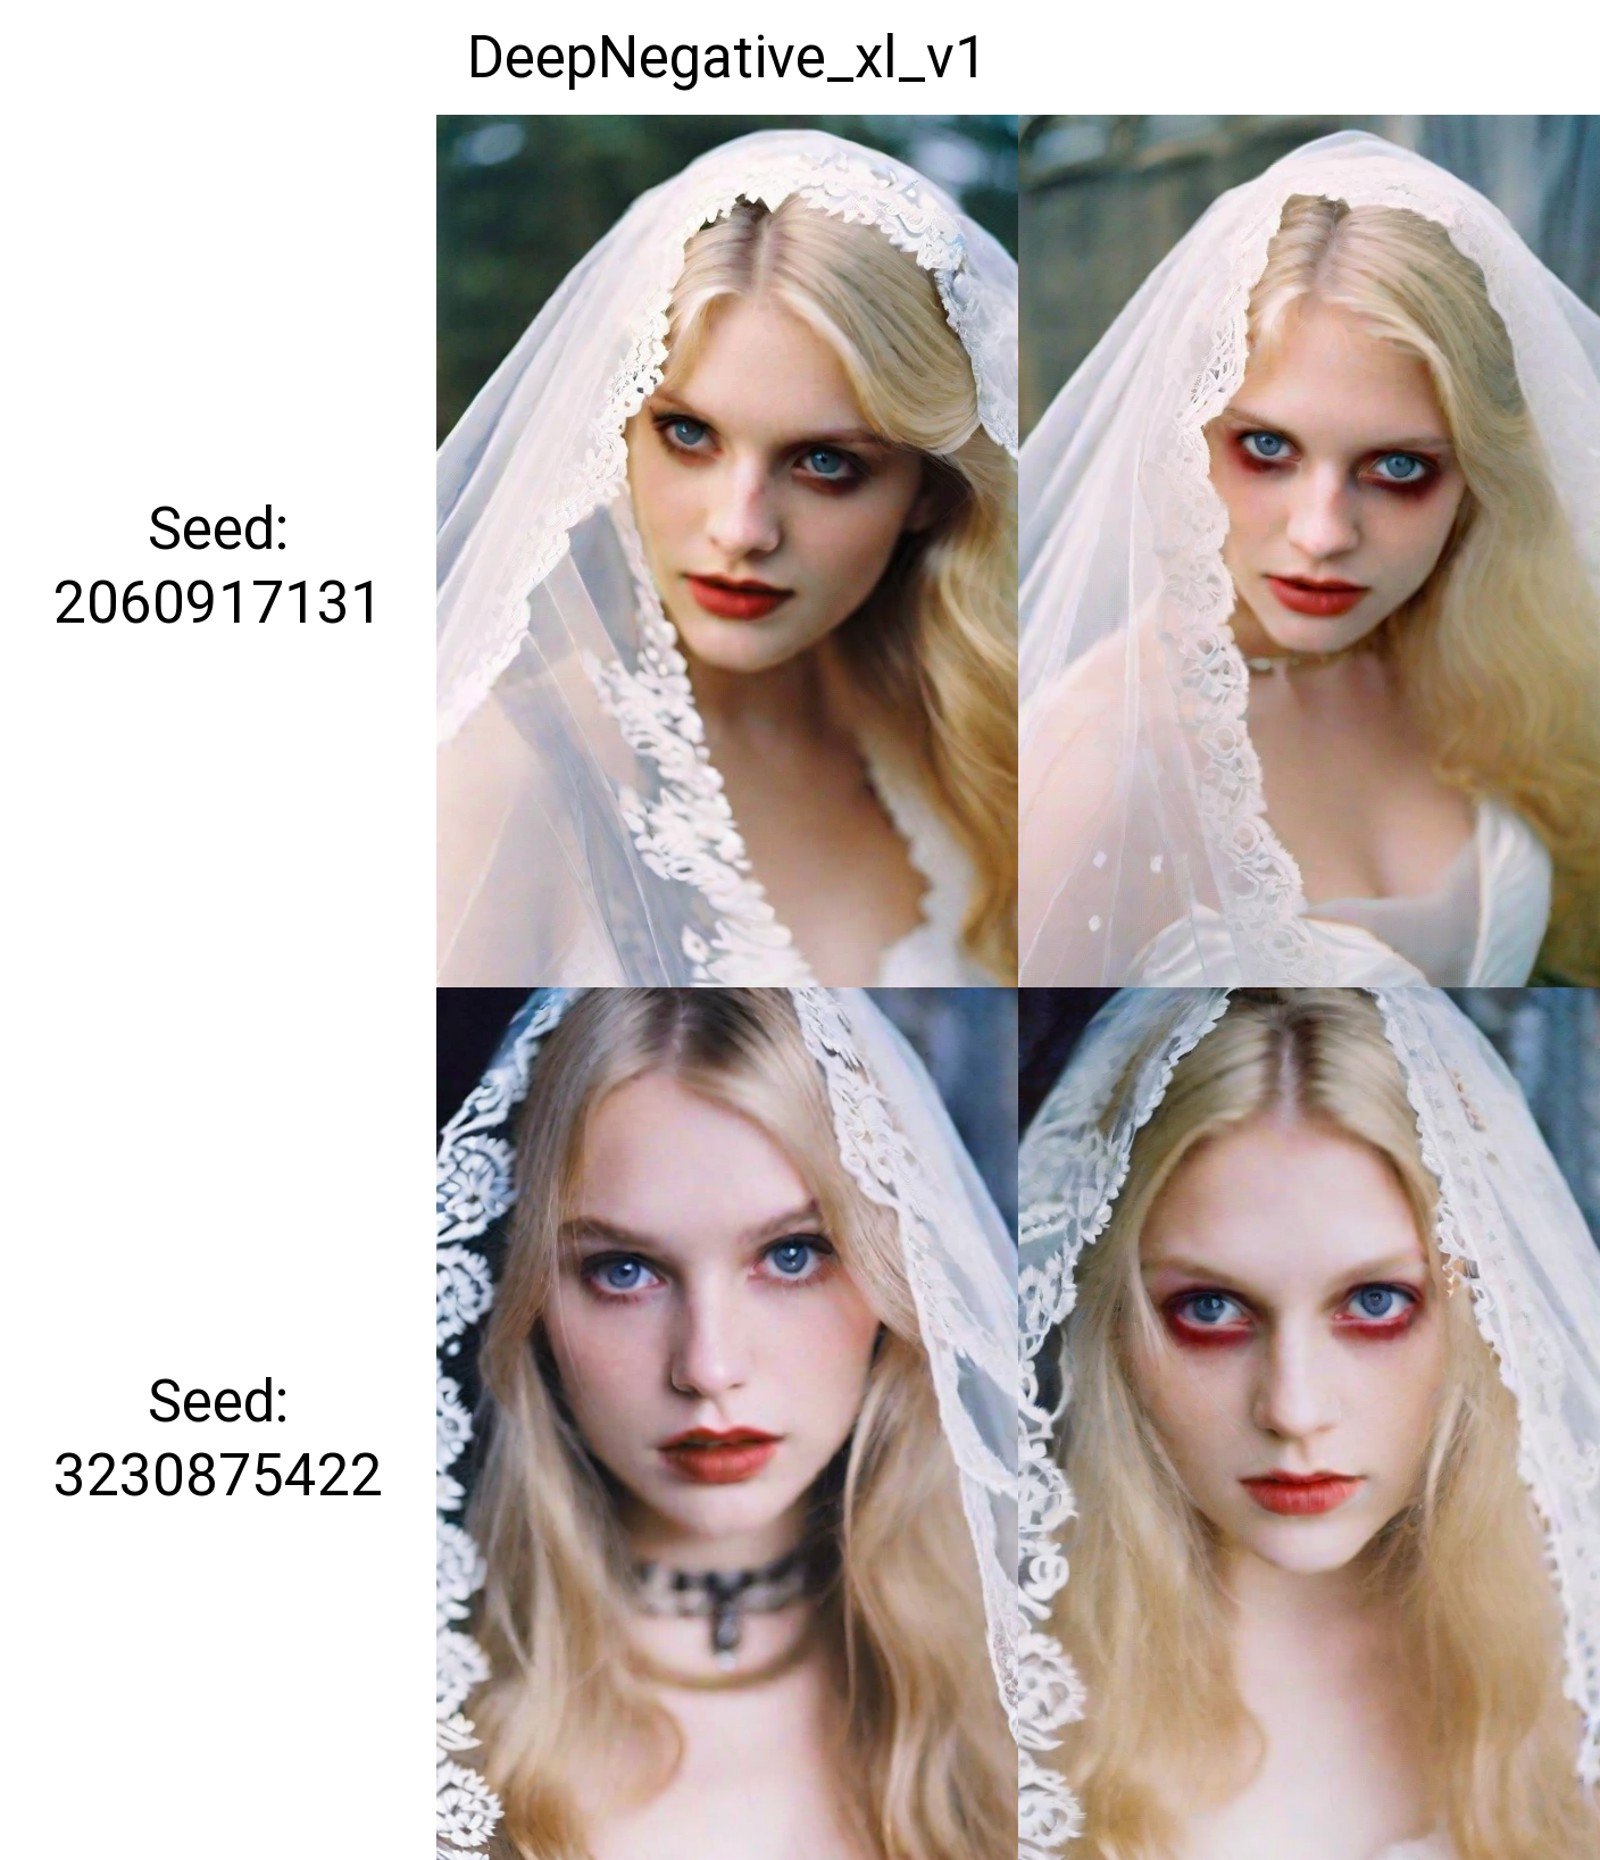 vampire bride,film photography aesthetic,the delicate texture of lace veil gently obscuring her face,long blonde hair,looking at viewer,eye eye contact,sapphire red eyes,choker,devil smile,dynamic composition,skin texture,from above,close-up,sharp focus,horror \(theme\),dutch angle,